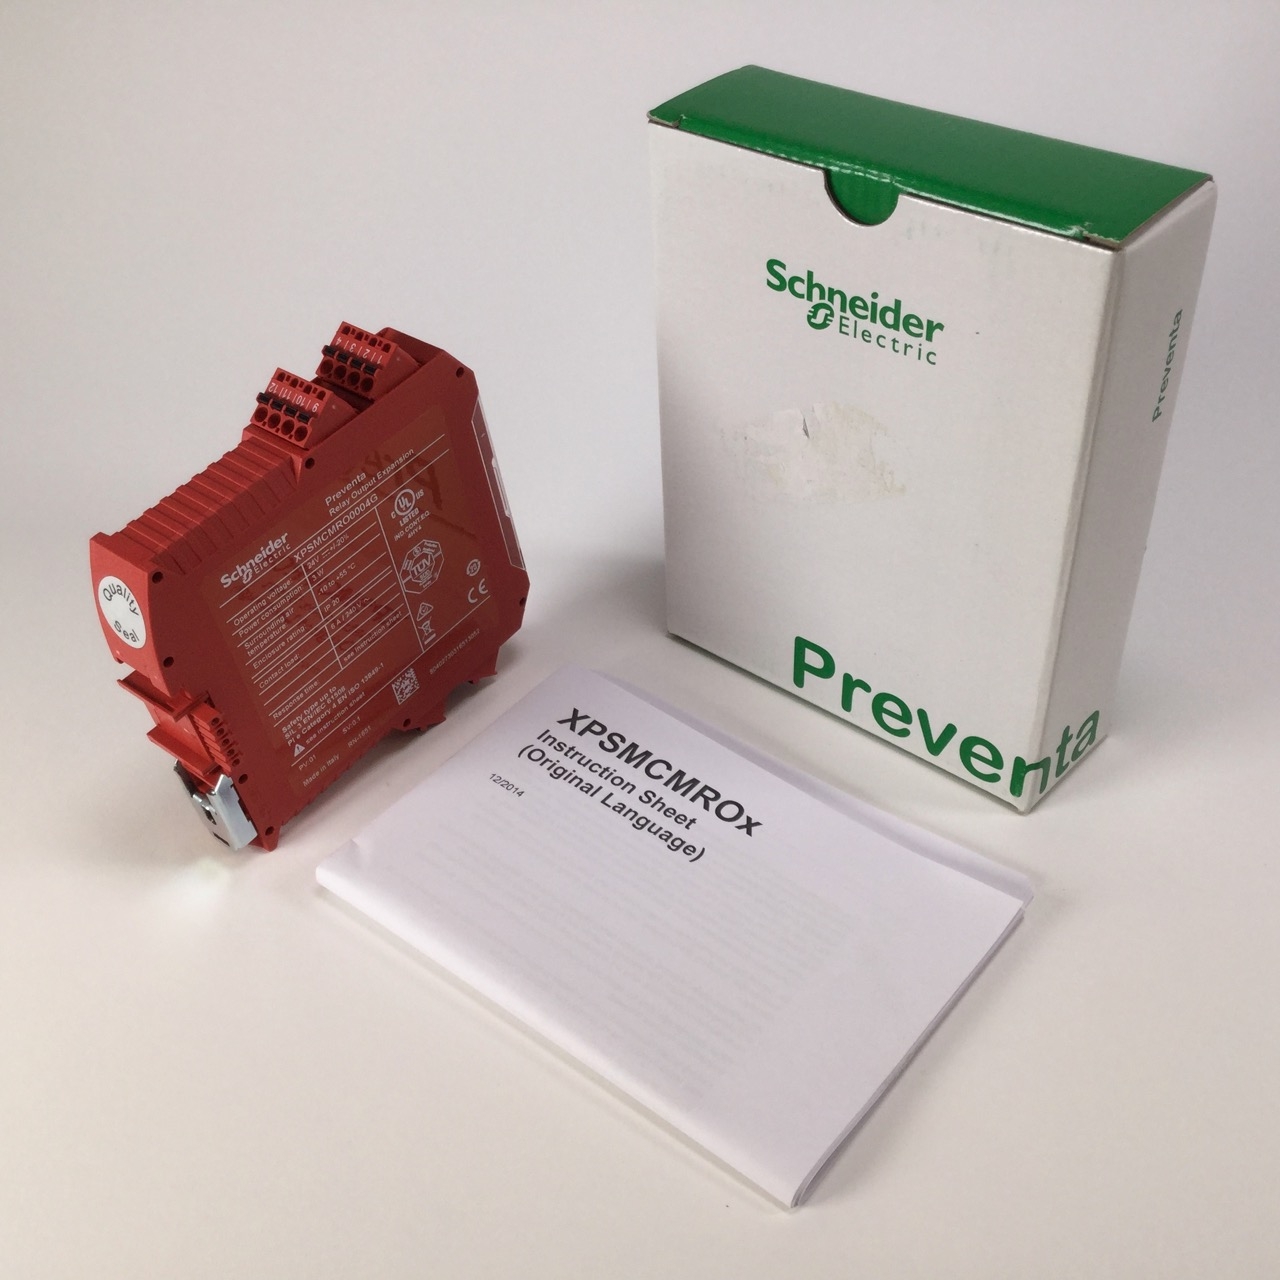 Schneider Electric XPSAC3421P Module safety emergency stop Preventa New NFP